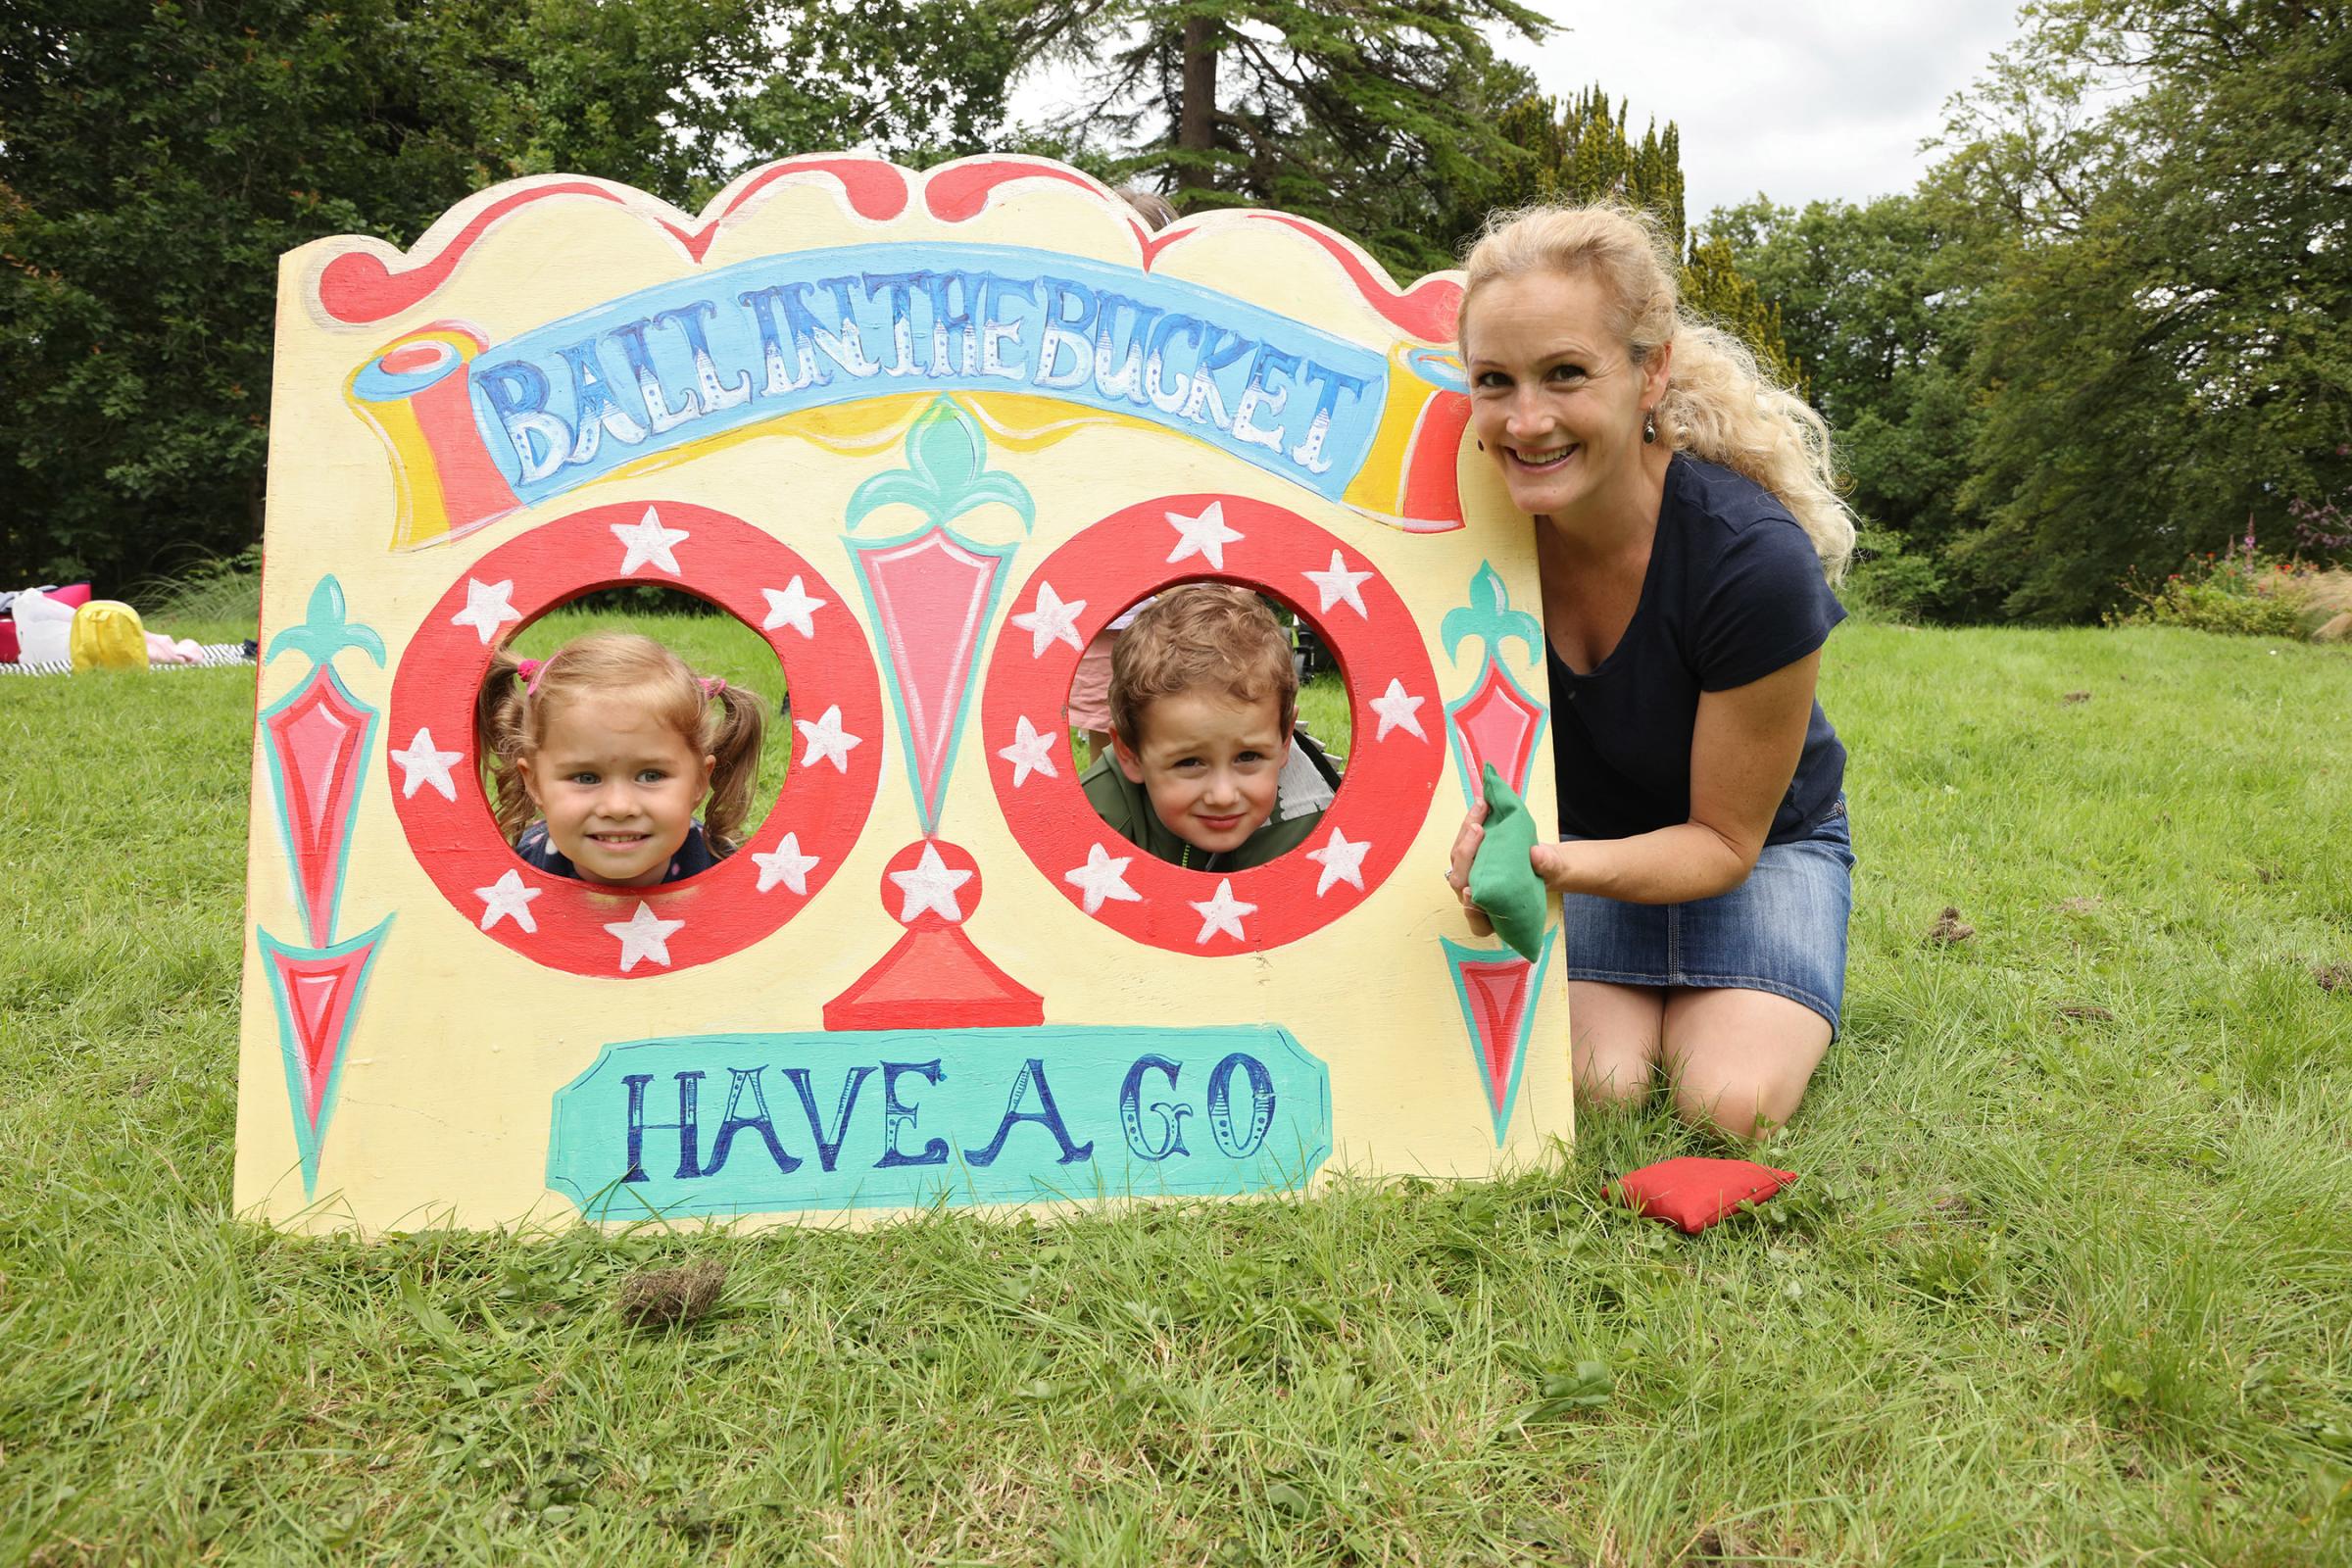 Mia Fleming has Charlie and Rachel Crawford wondering what she is going to do at the party at Forthill Park.